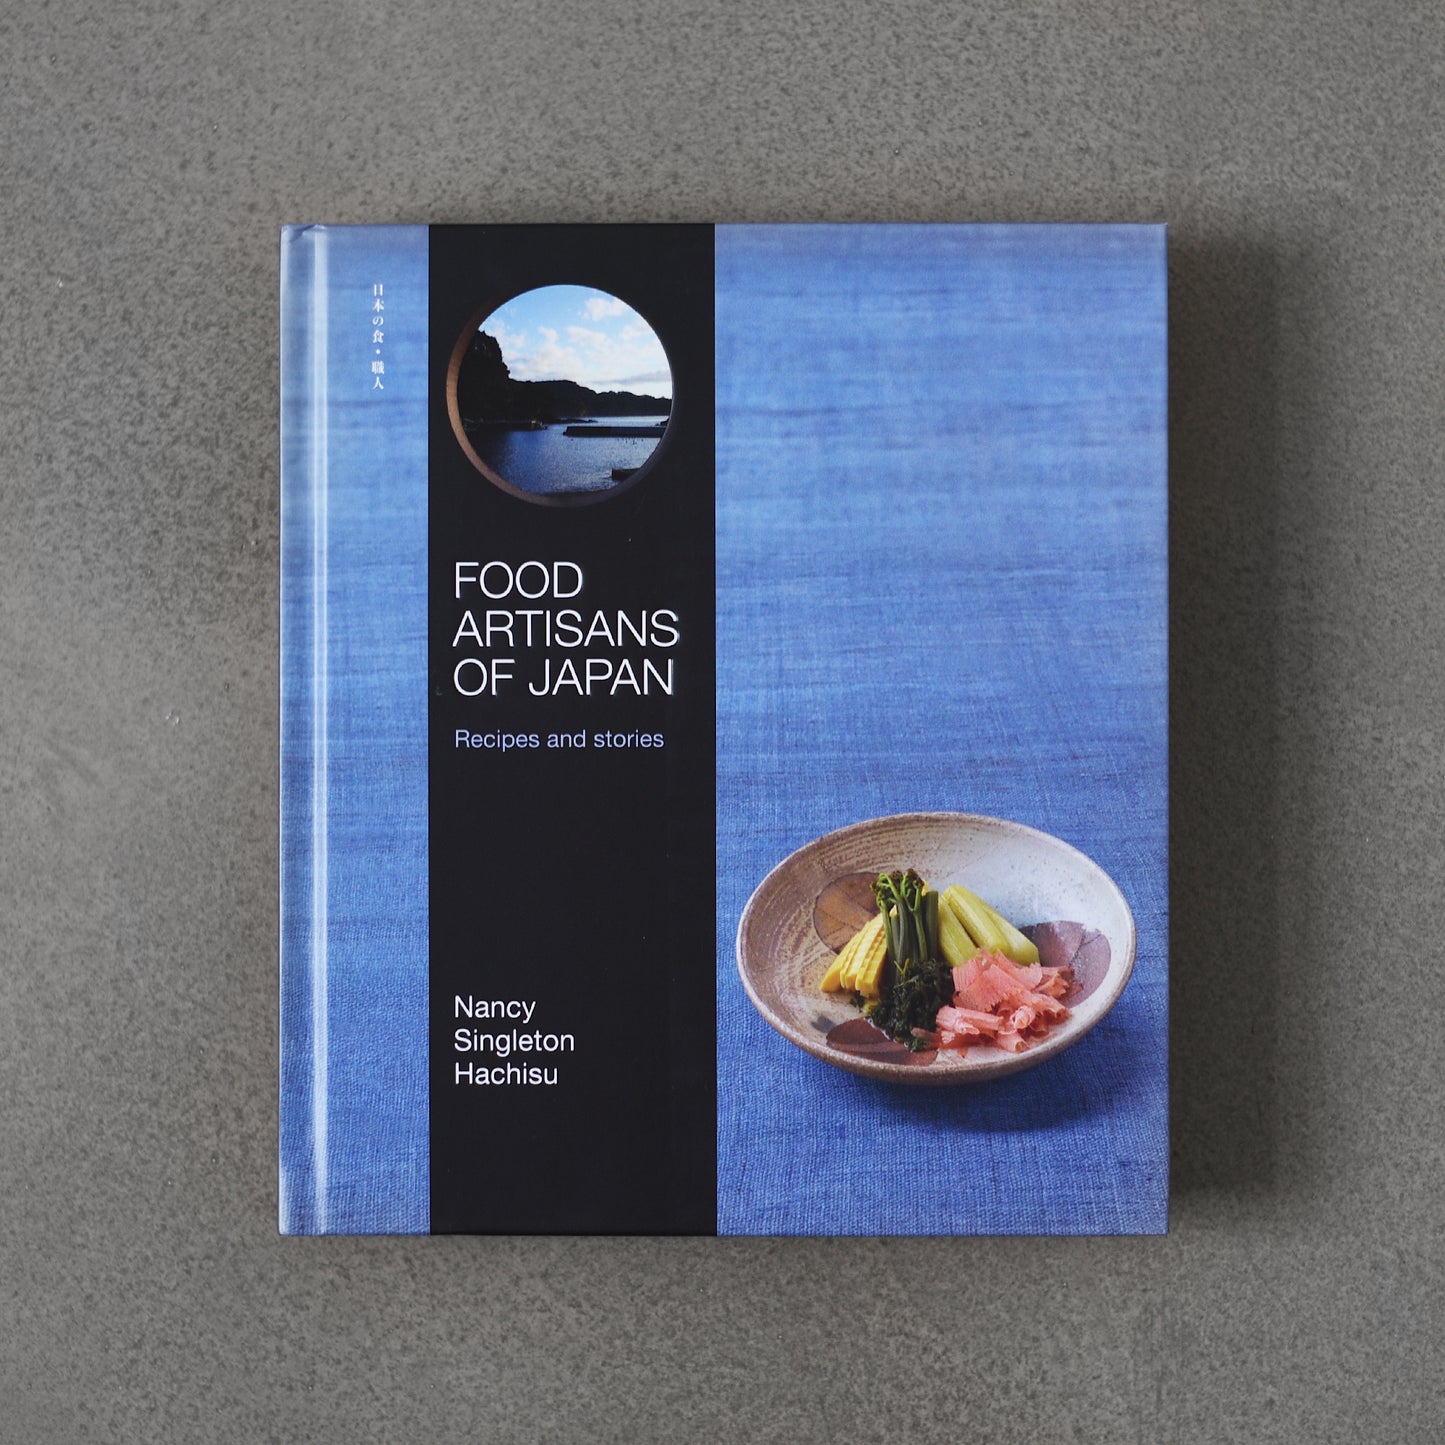 Food Artisans of Japan: Recipes and Stories